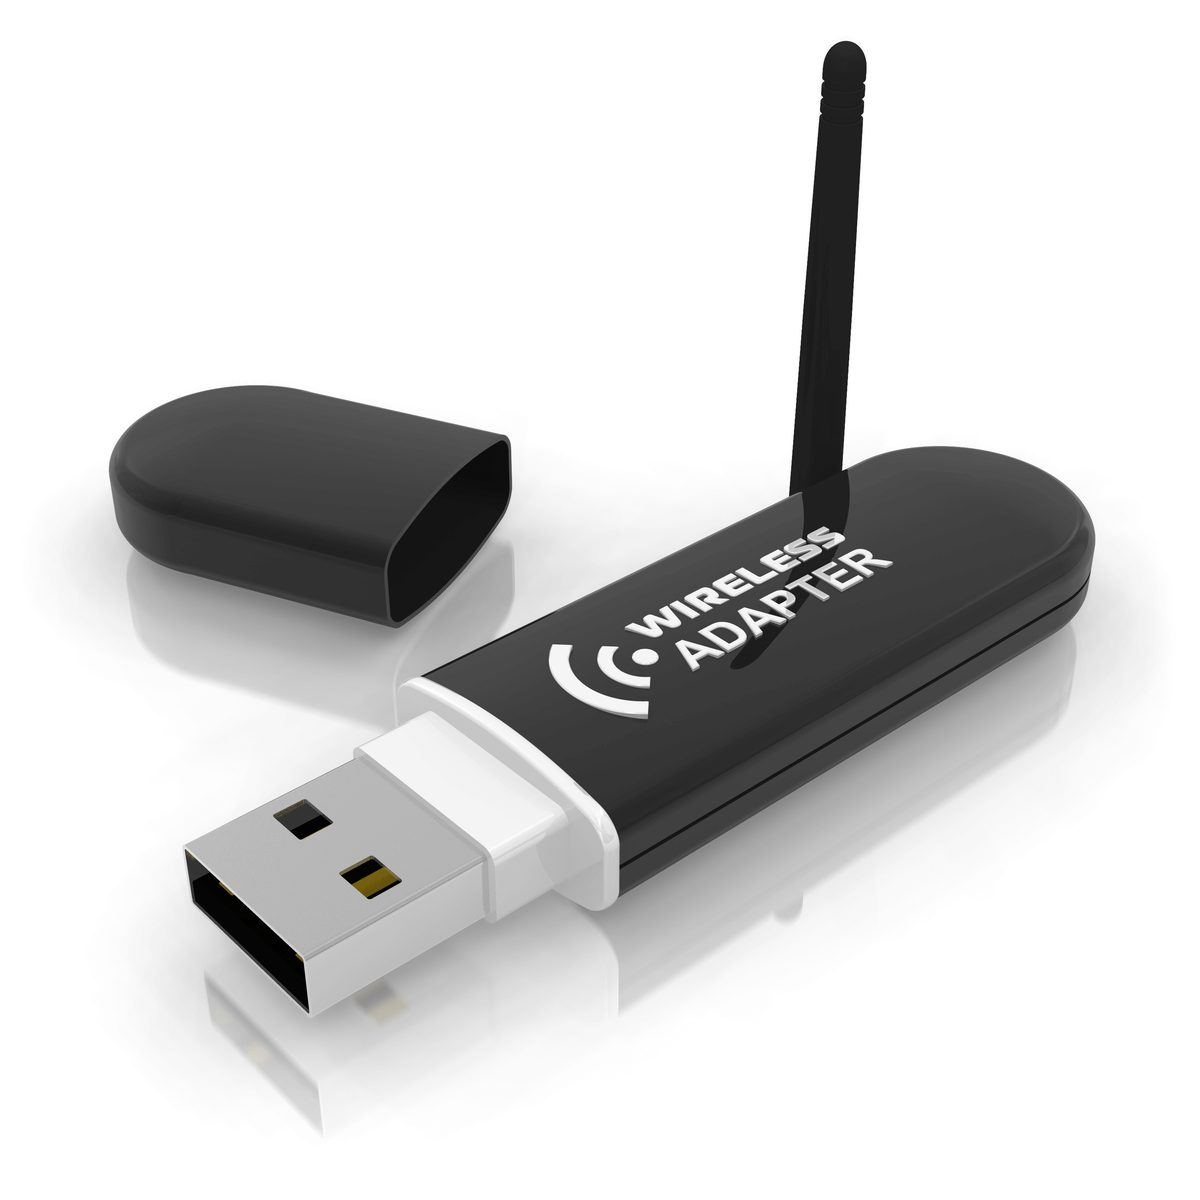 5 best USB network adapters [2021 Guide]